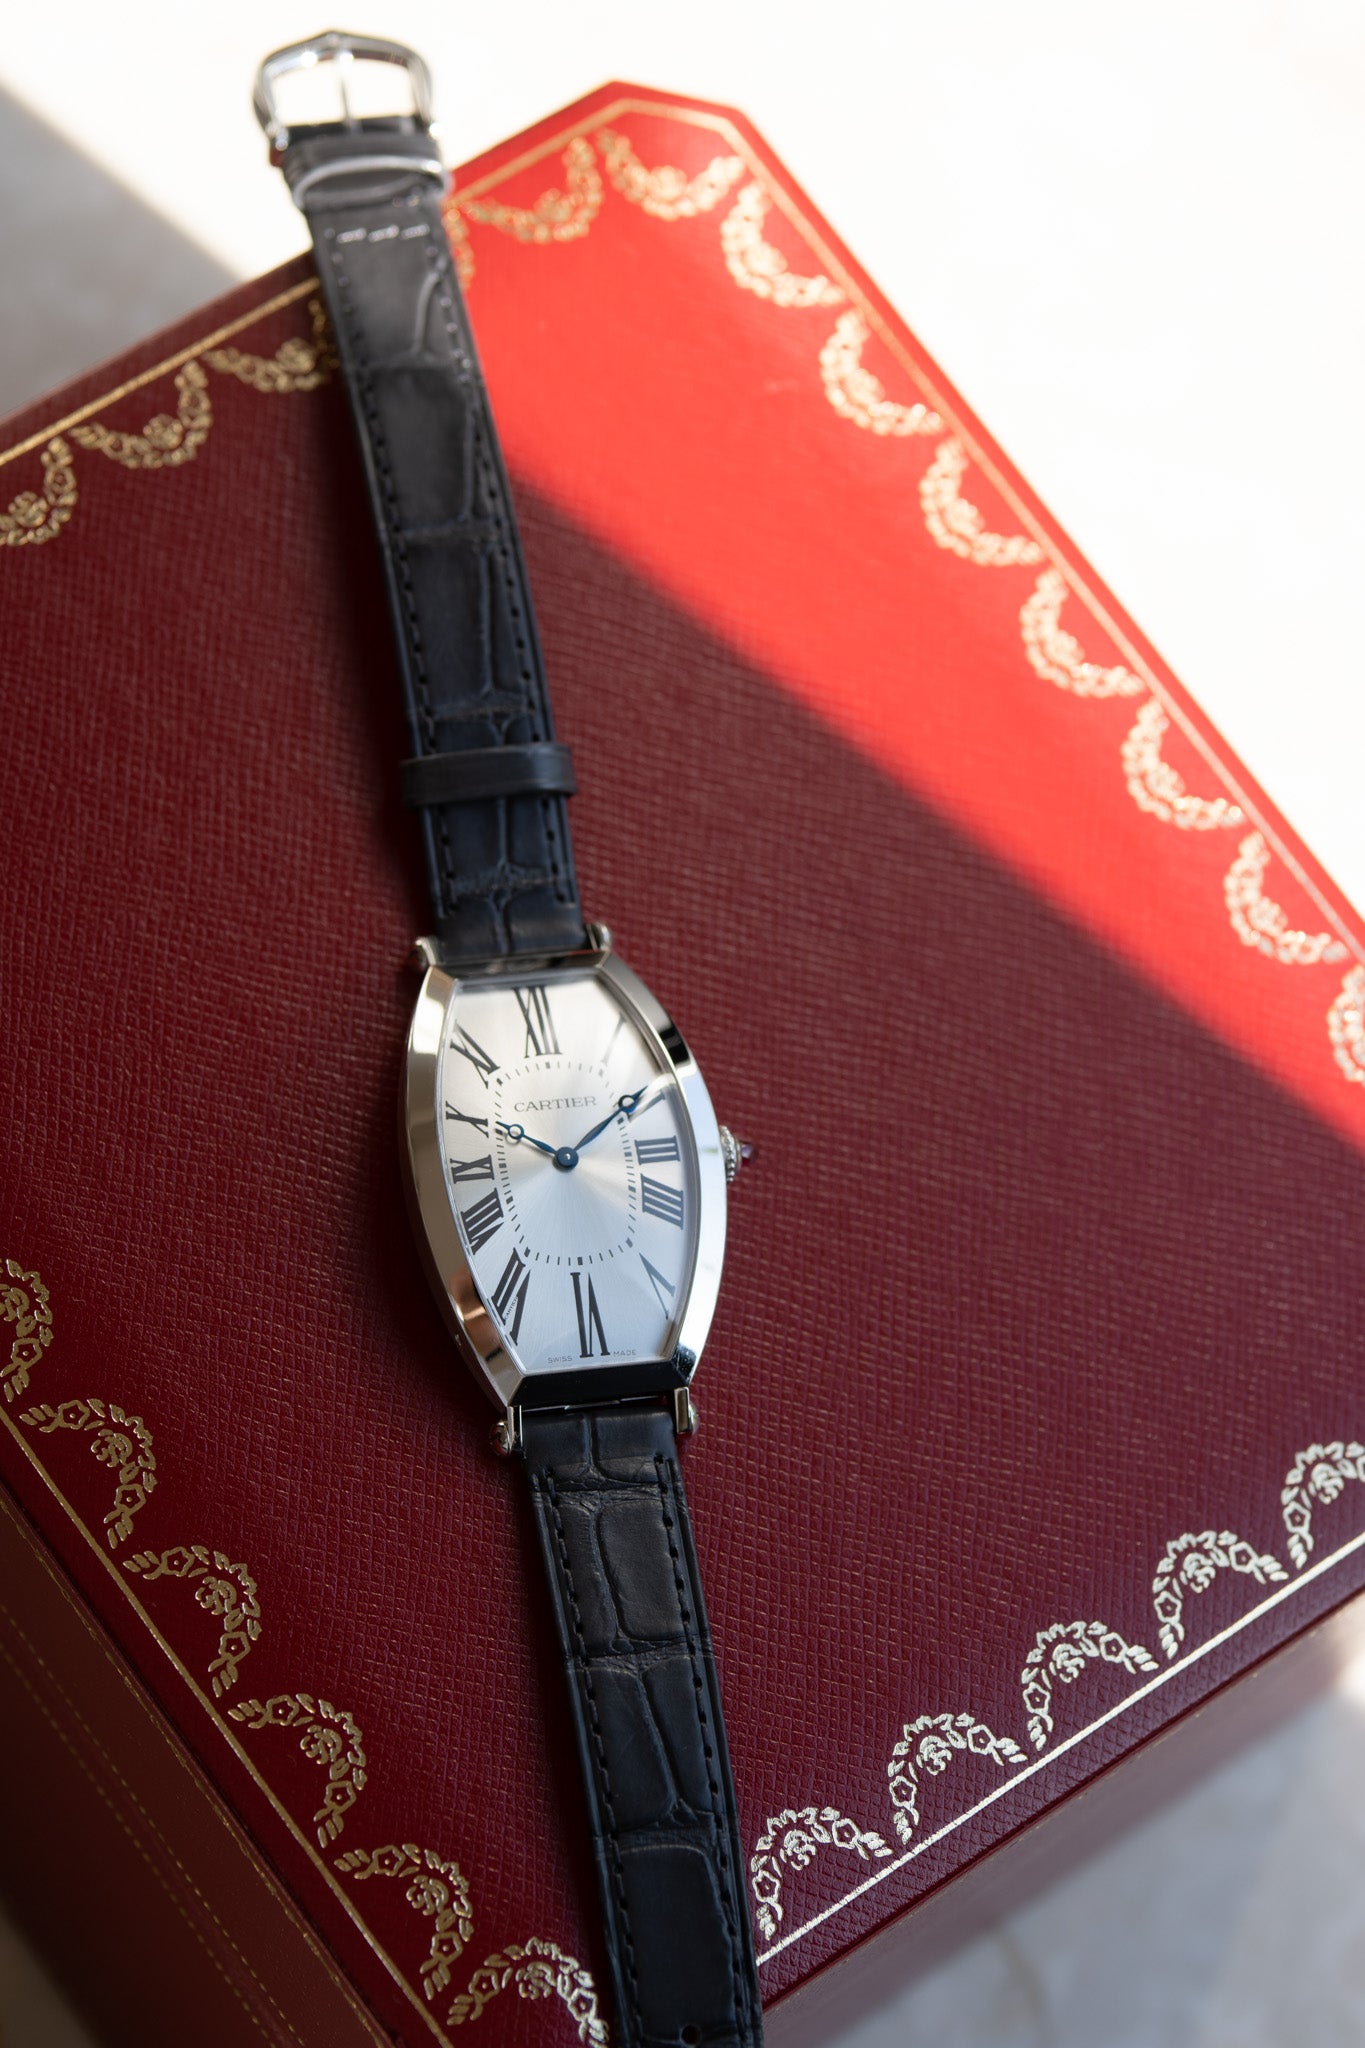 Cartier Tonneau Platinum from Collection Prive, limited edition 100 pieces